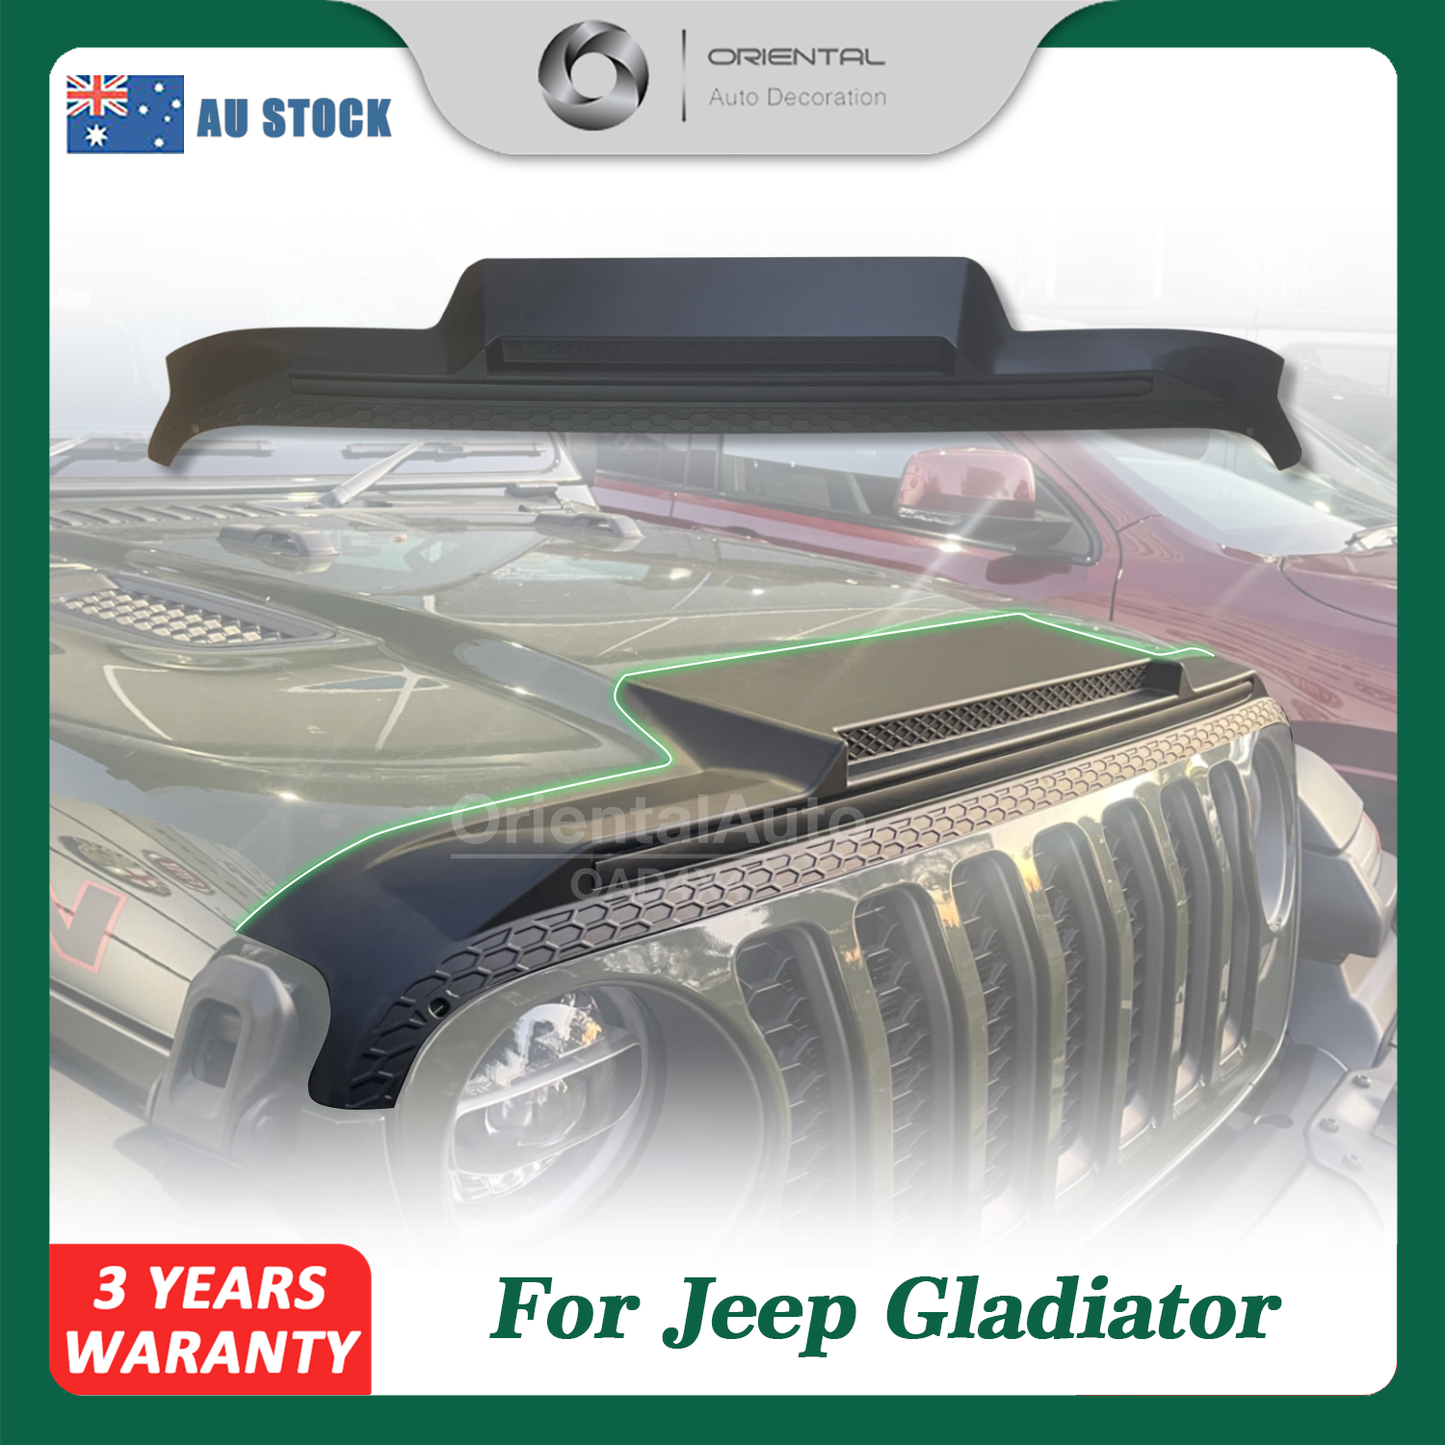 Injection Modeling Bonnet Protector for Jeep Gladiator Dual Cab 2020-Onwards Hood Protector Bonnet Guard